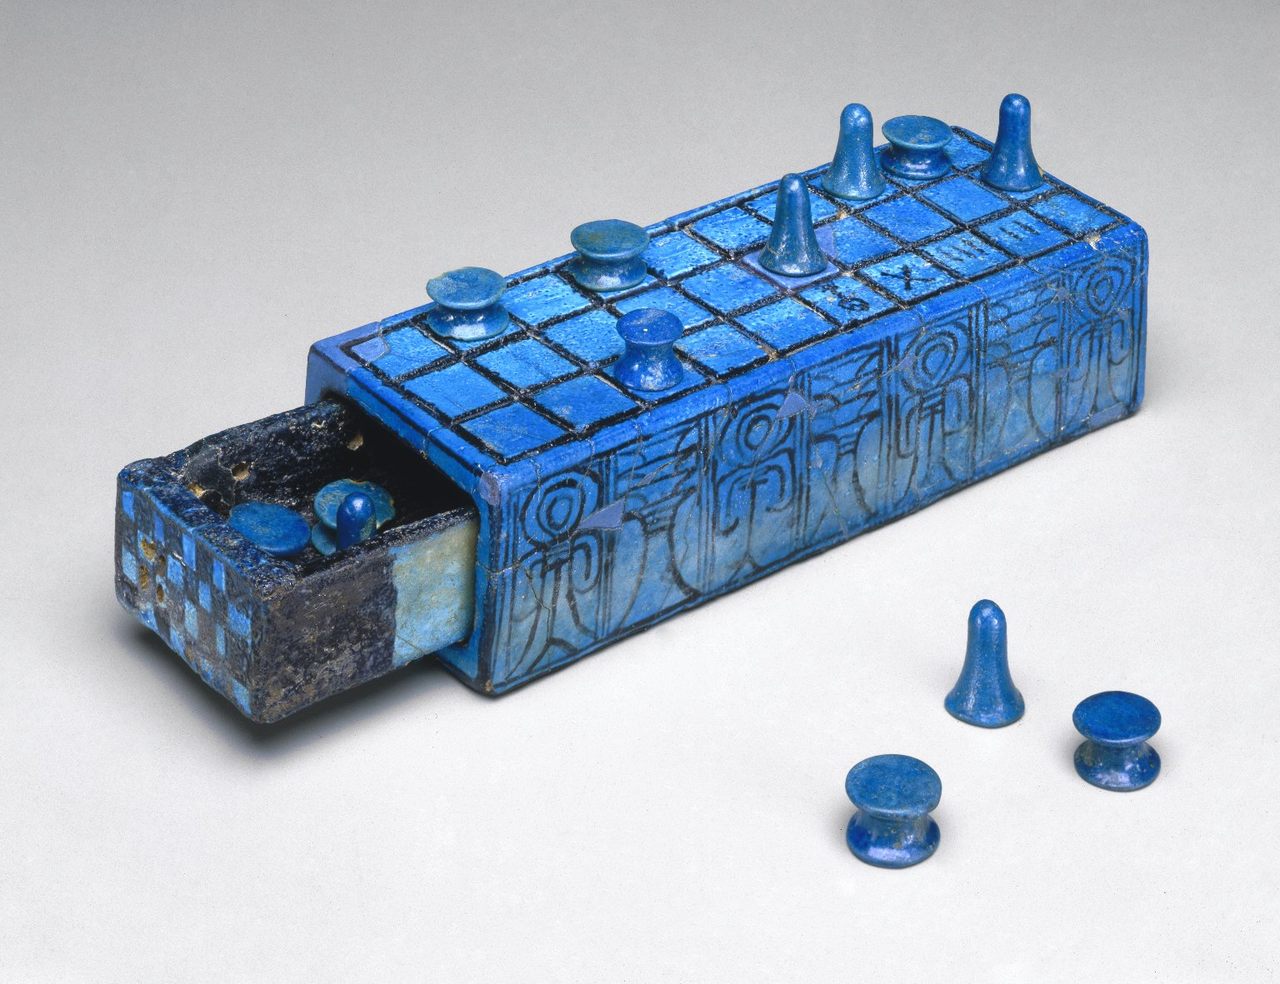 An ancient senet board inscribed with the name of Amenhotep III, with a sliding compartment for pieces, dating to the 14th century B.C. 